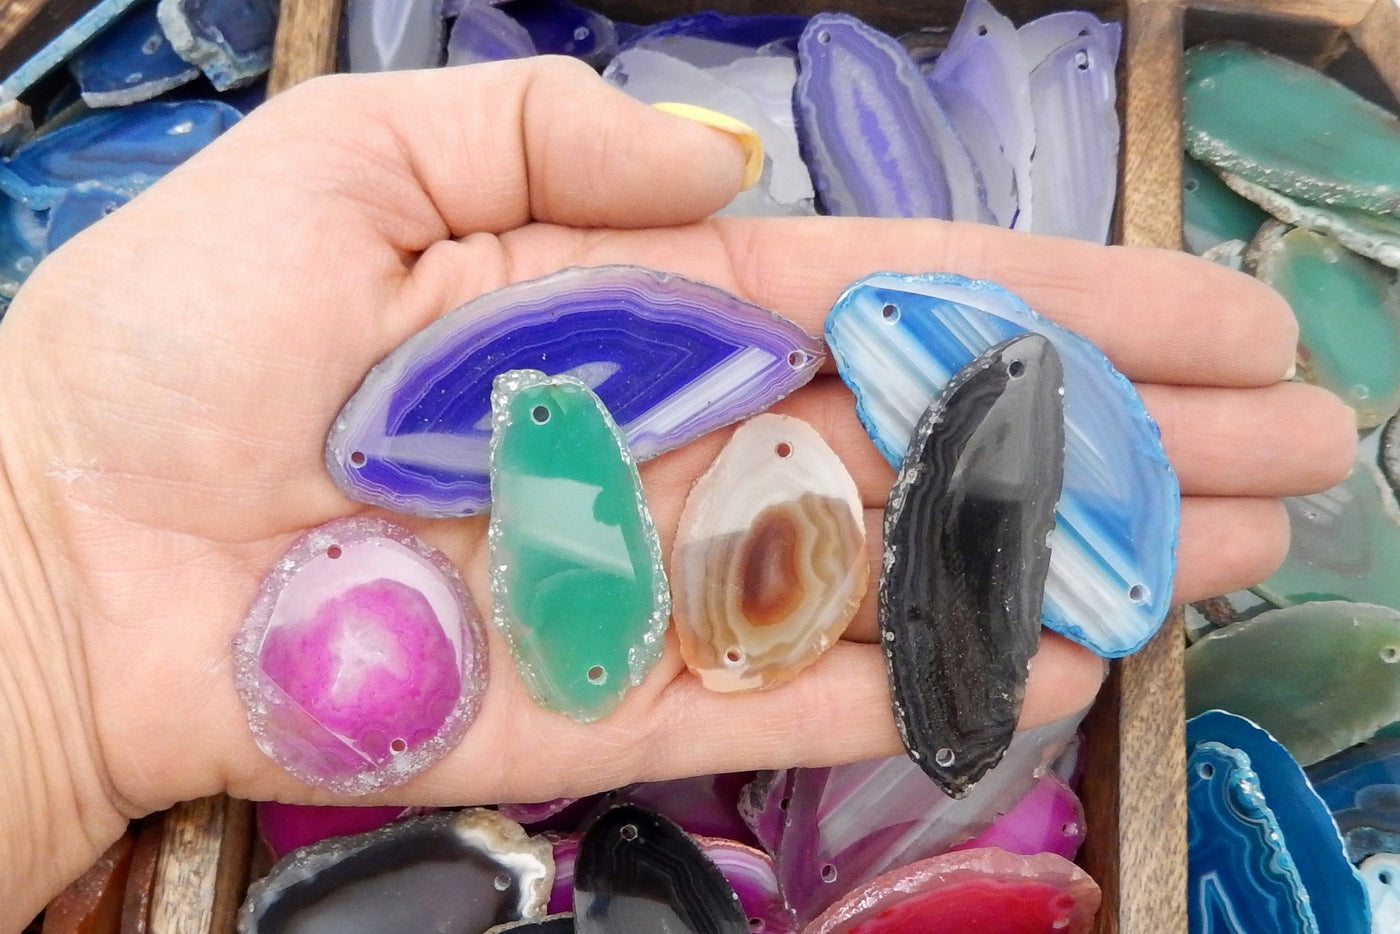 Agates slices are being held for size reference. 